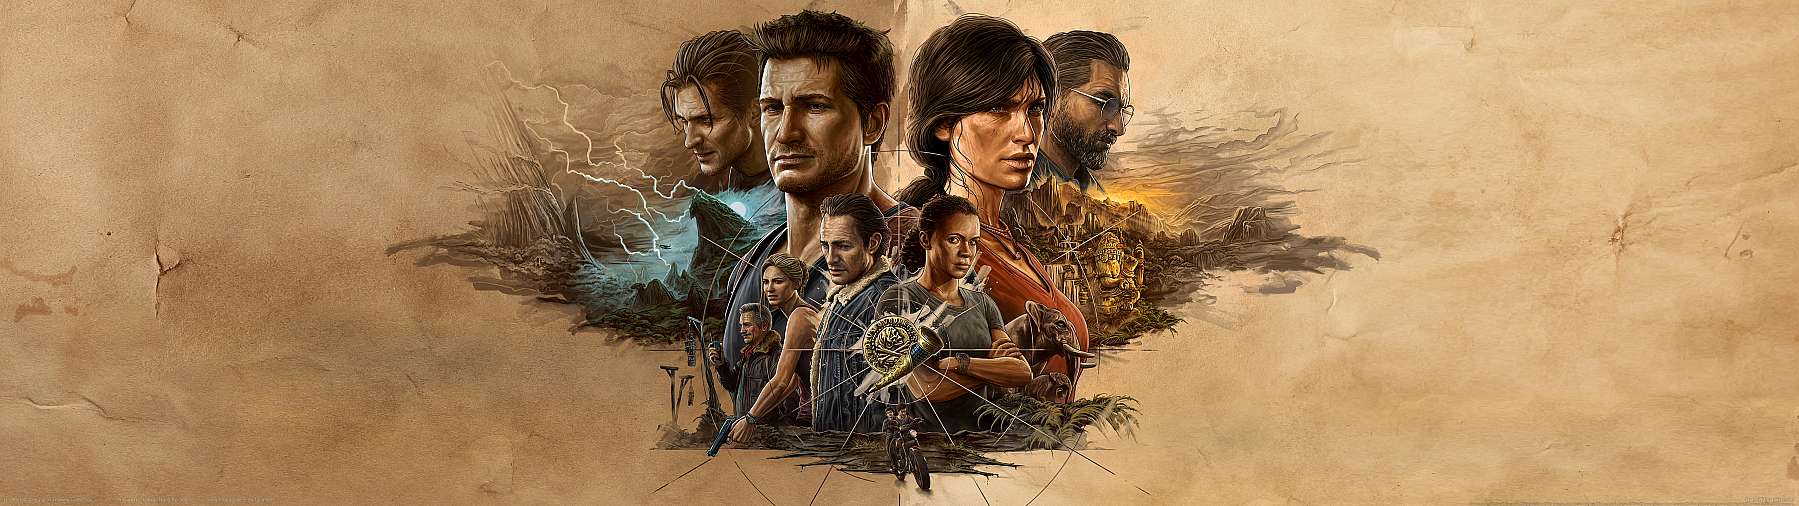 Uncharted: Legacy of Thieves Collection wallpaper or background